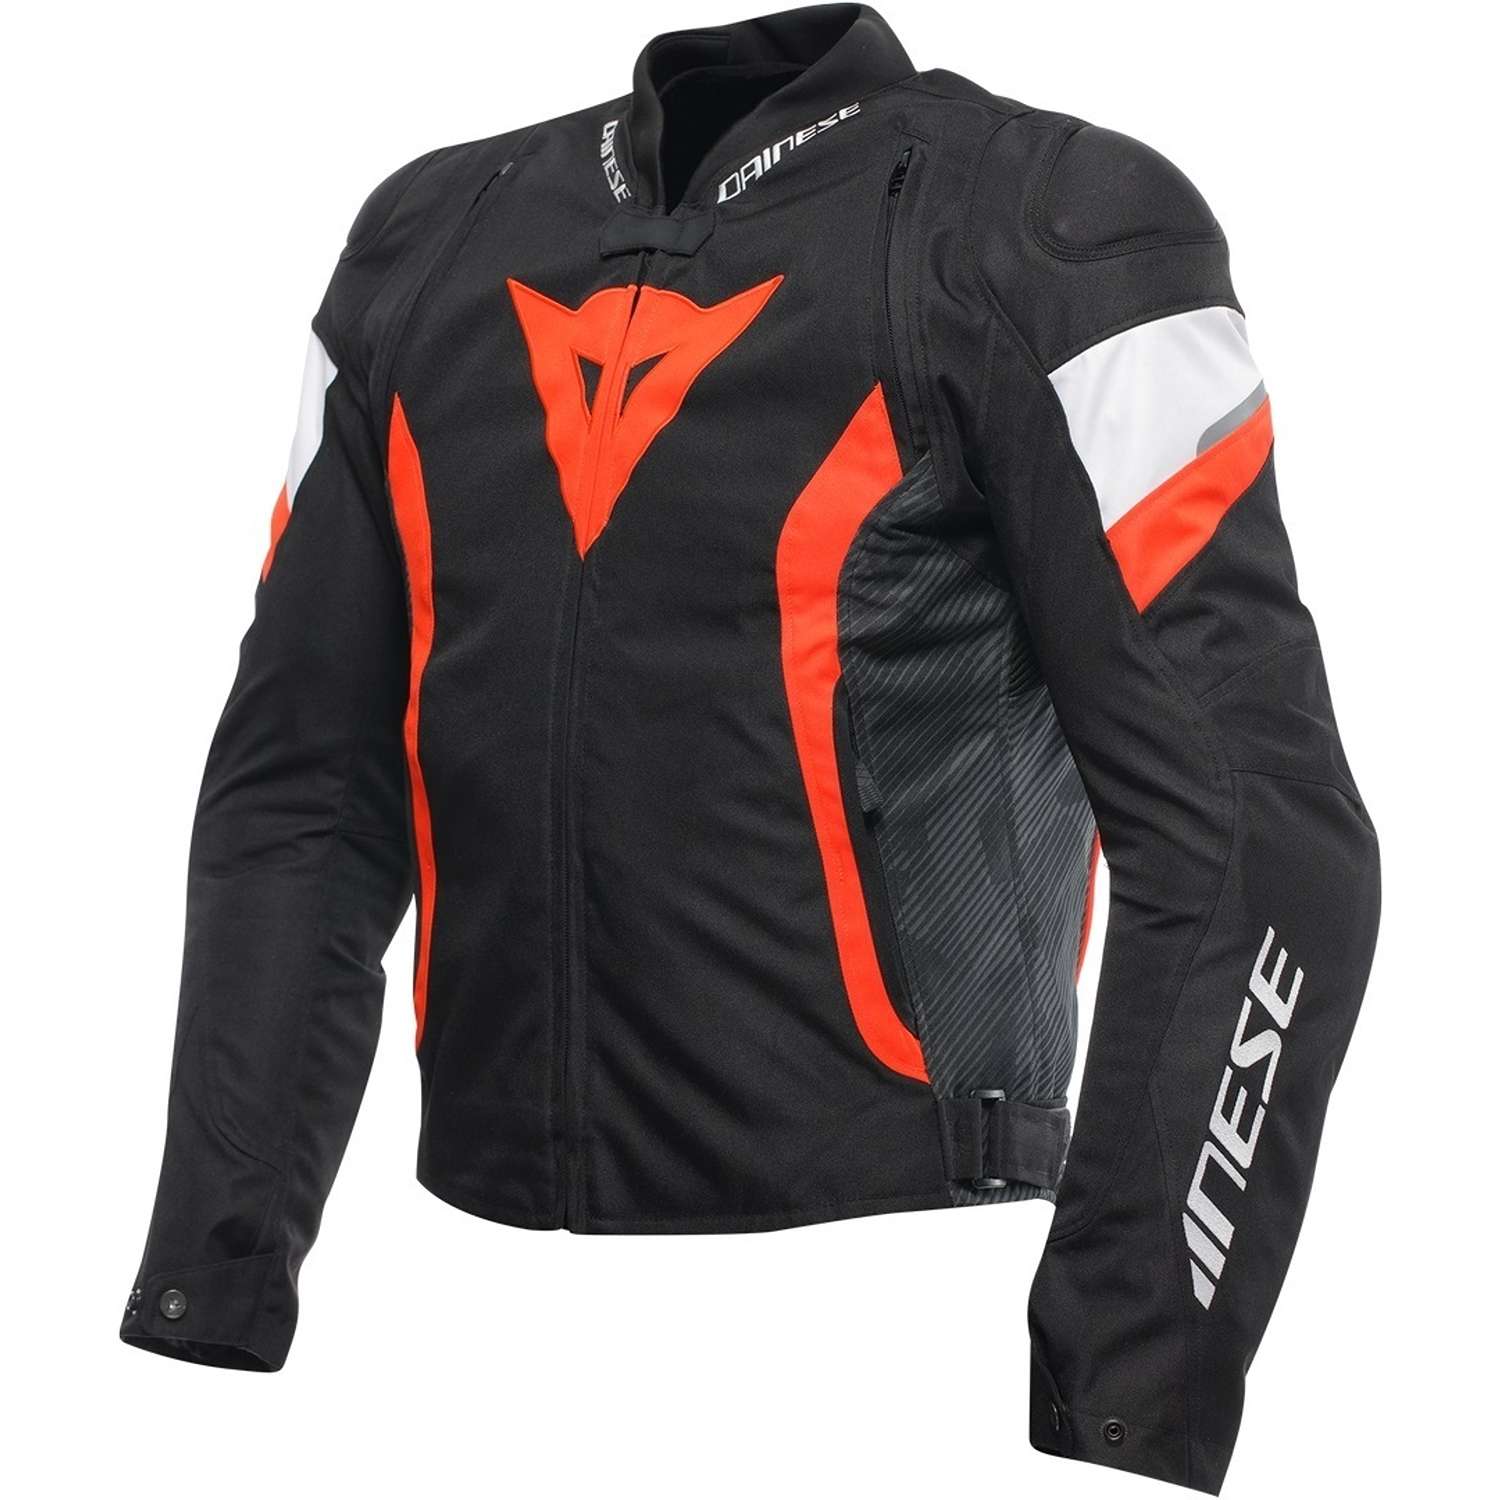 Image of Dainese Avro 5 Tex Jacket Black Red Fluo White Size 60 ID 8051019697967